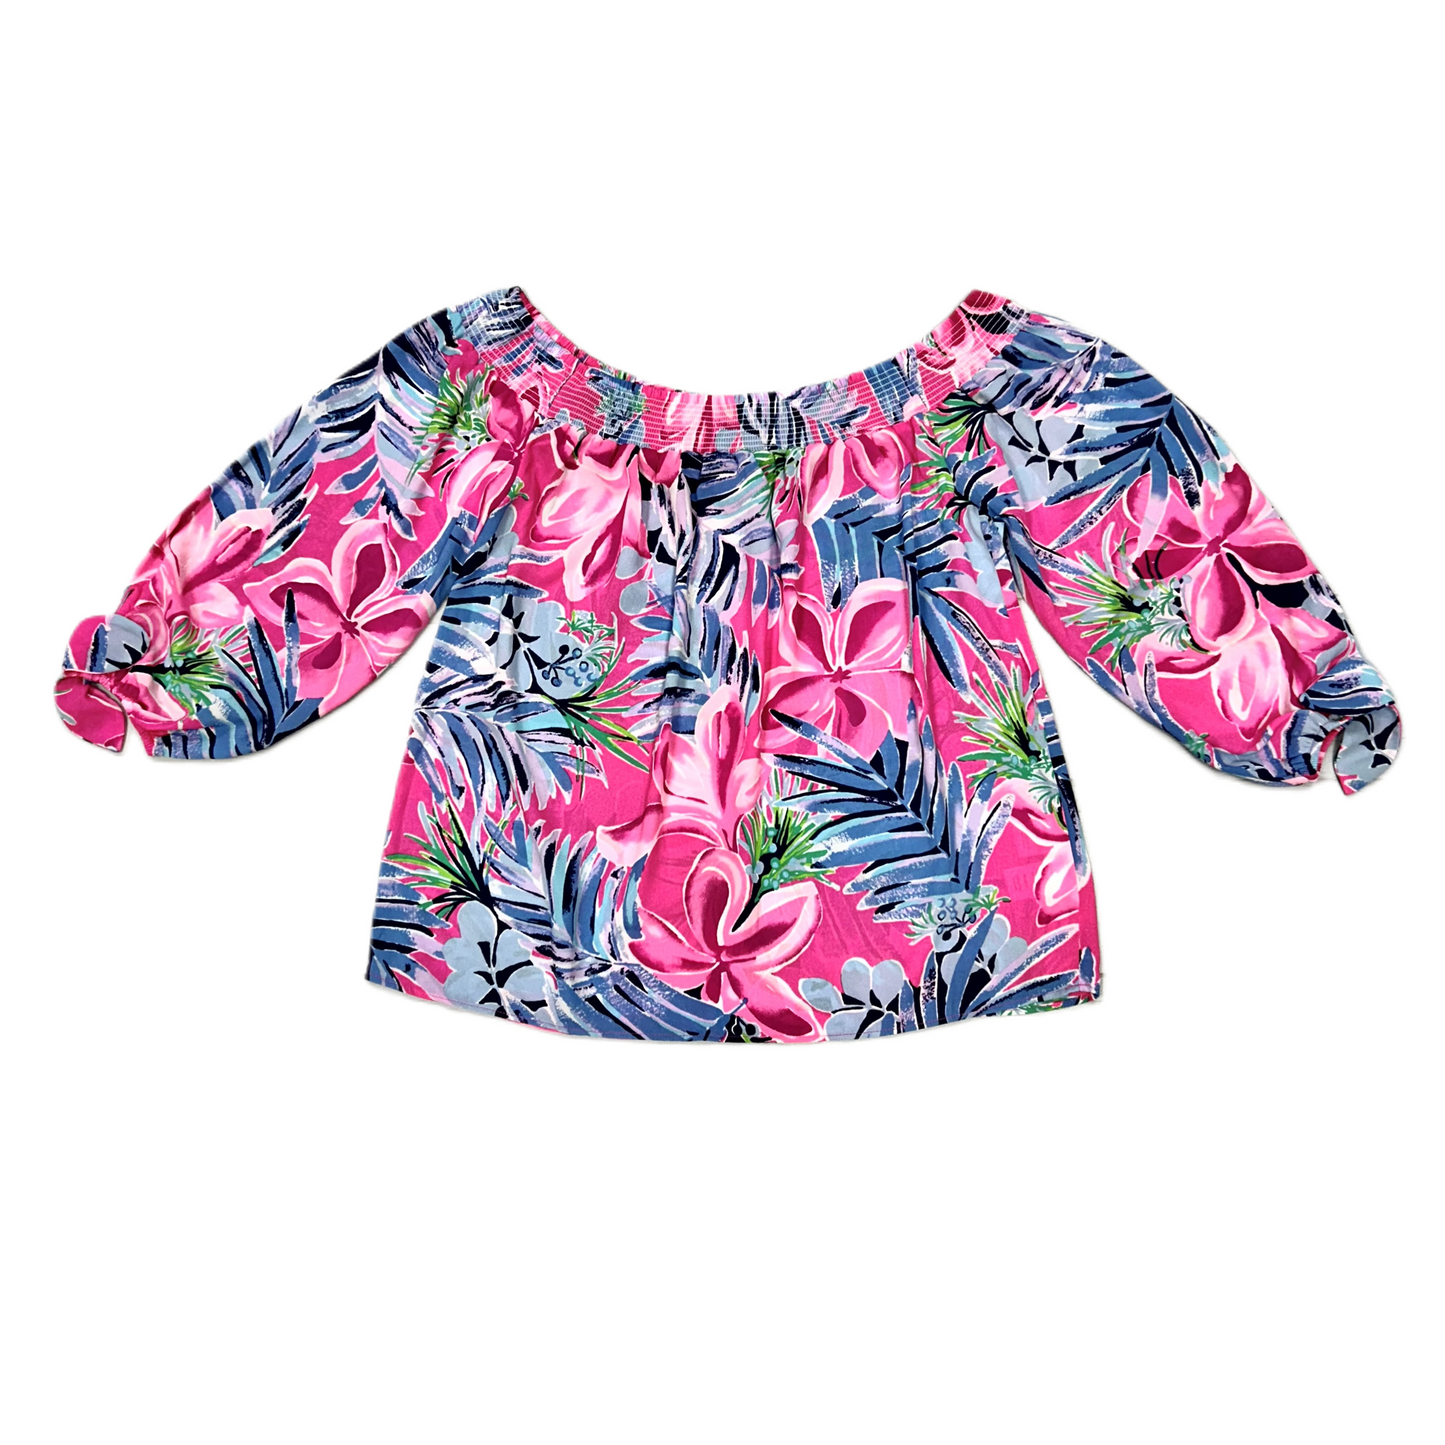 Flowered Top Long Sleeve Designer By Lilly Pulitzer, Size: S